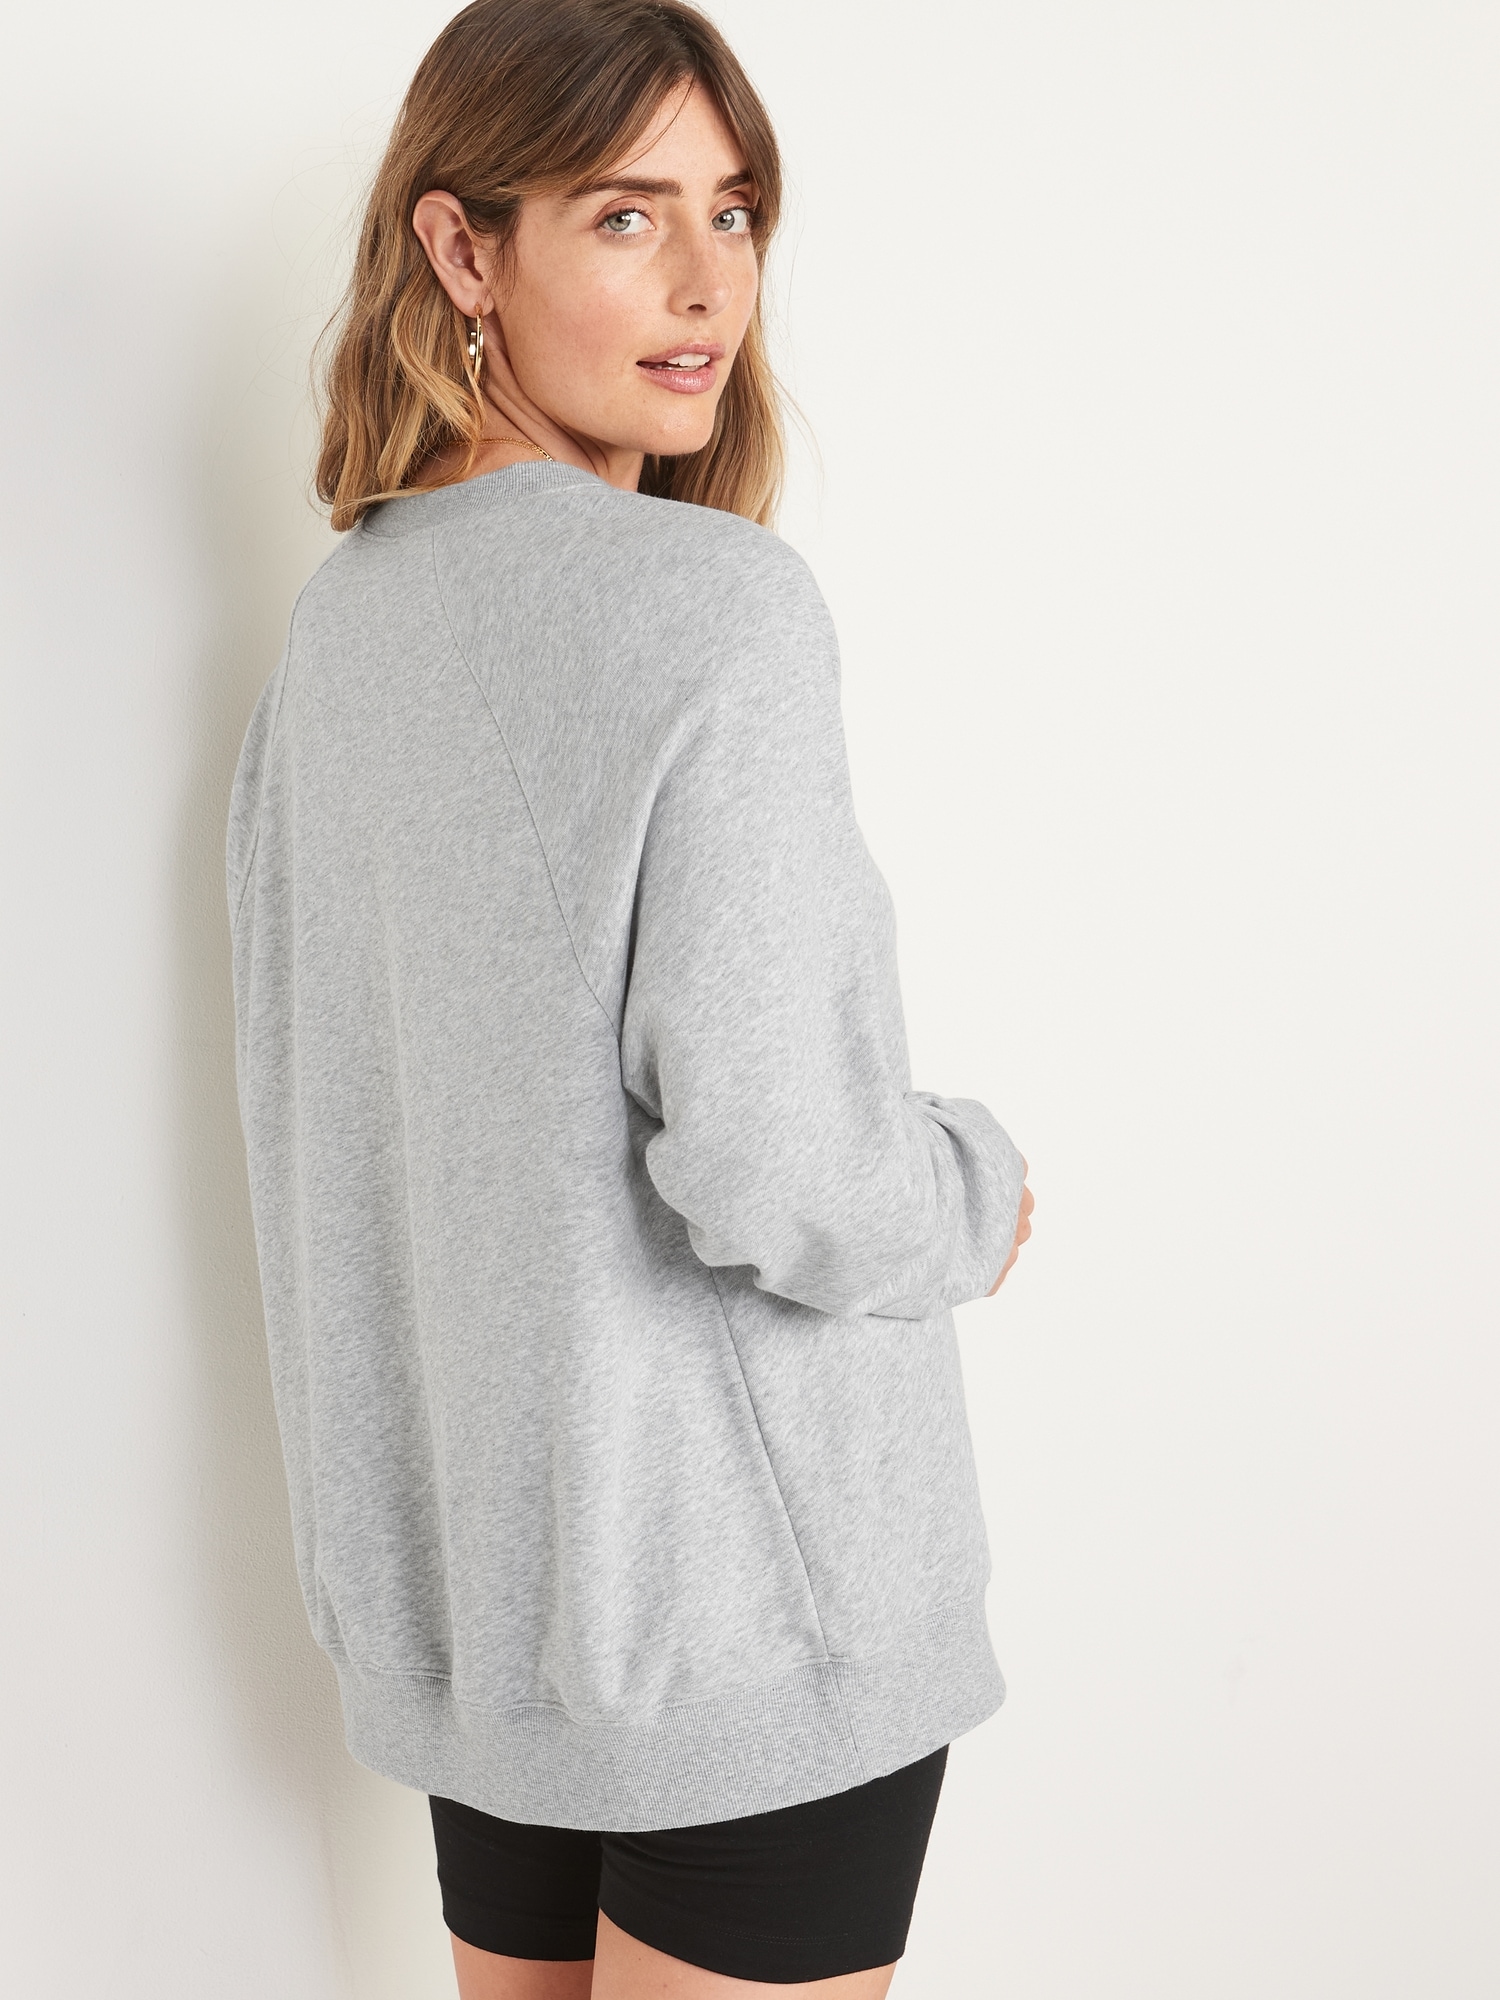 French for Old Sweatshirt Oversized Tunic | Terry Navy Women